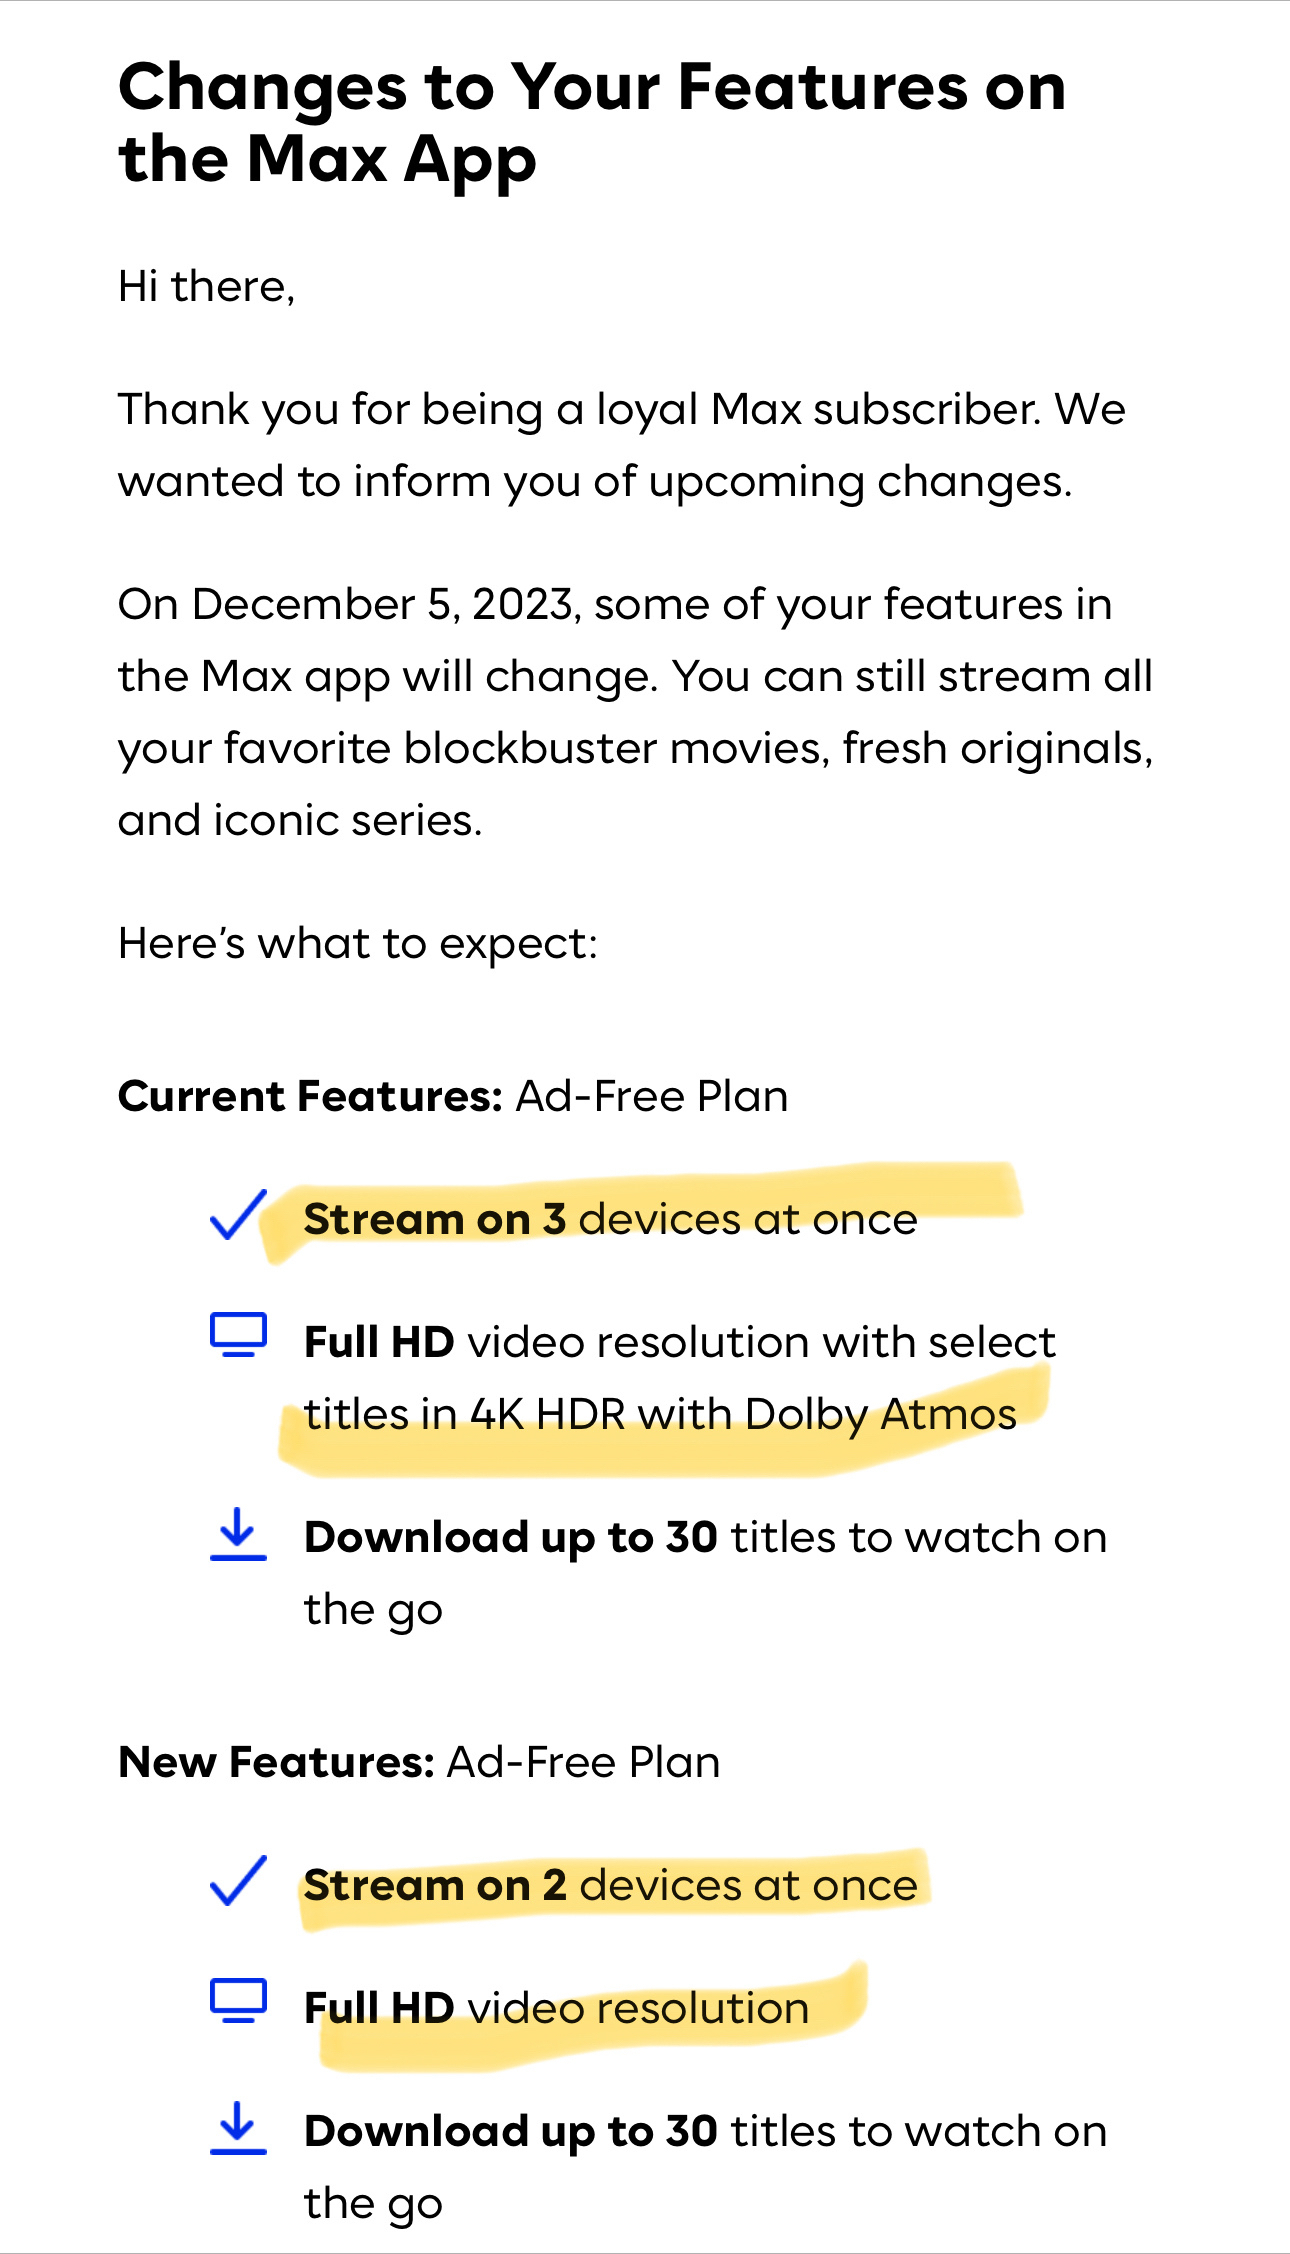 Changes to Your Features on the Max App&10;Hi there,&10;Thank you for being a loyal Max subscriber. We wanted to inform you of upcoming changes.&10;On December 5, 2023, some of your features in the Max app will change. You can still stream all your favorite blockbuster movies, fresh originals, and iconic series.&10;Here's what to expect:&10;Current Features: Ad-Free Plan&10;Stream on 3 devices at once&10;# Full HD video resolution with select&10;titles in 4K HDR with Dolby Atmos&10;Download up to 30 titles to watch on the go&10;New Features: Ad-Free Plan&10;Stream on 2 devices at once&10;口&10;Full HD video resolution&10;Download up to 30 titles to watch on the go